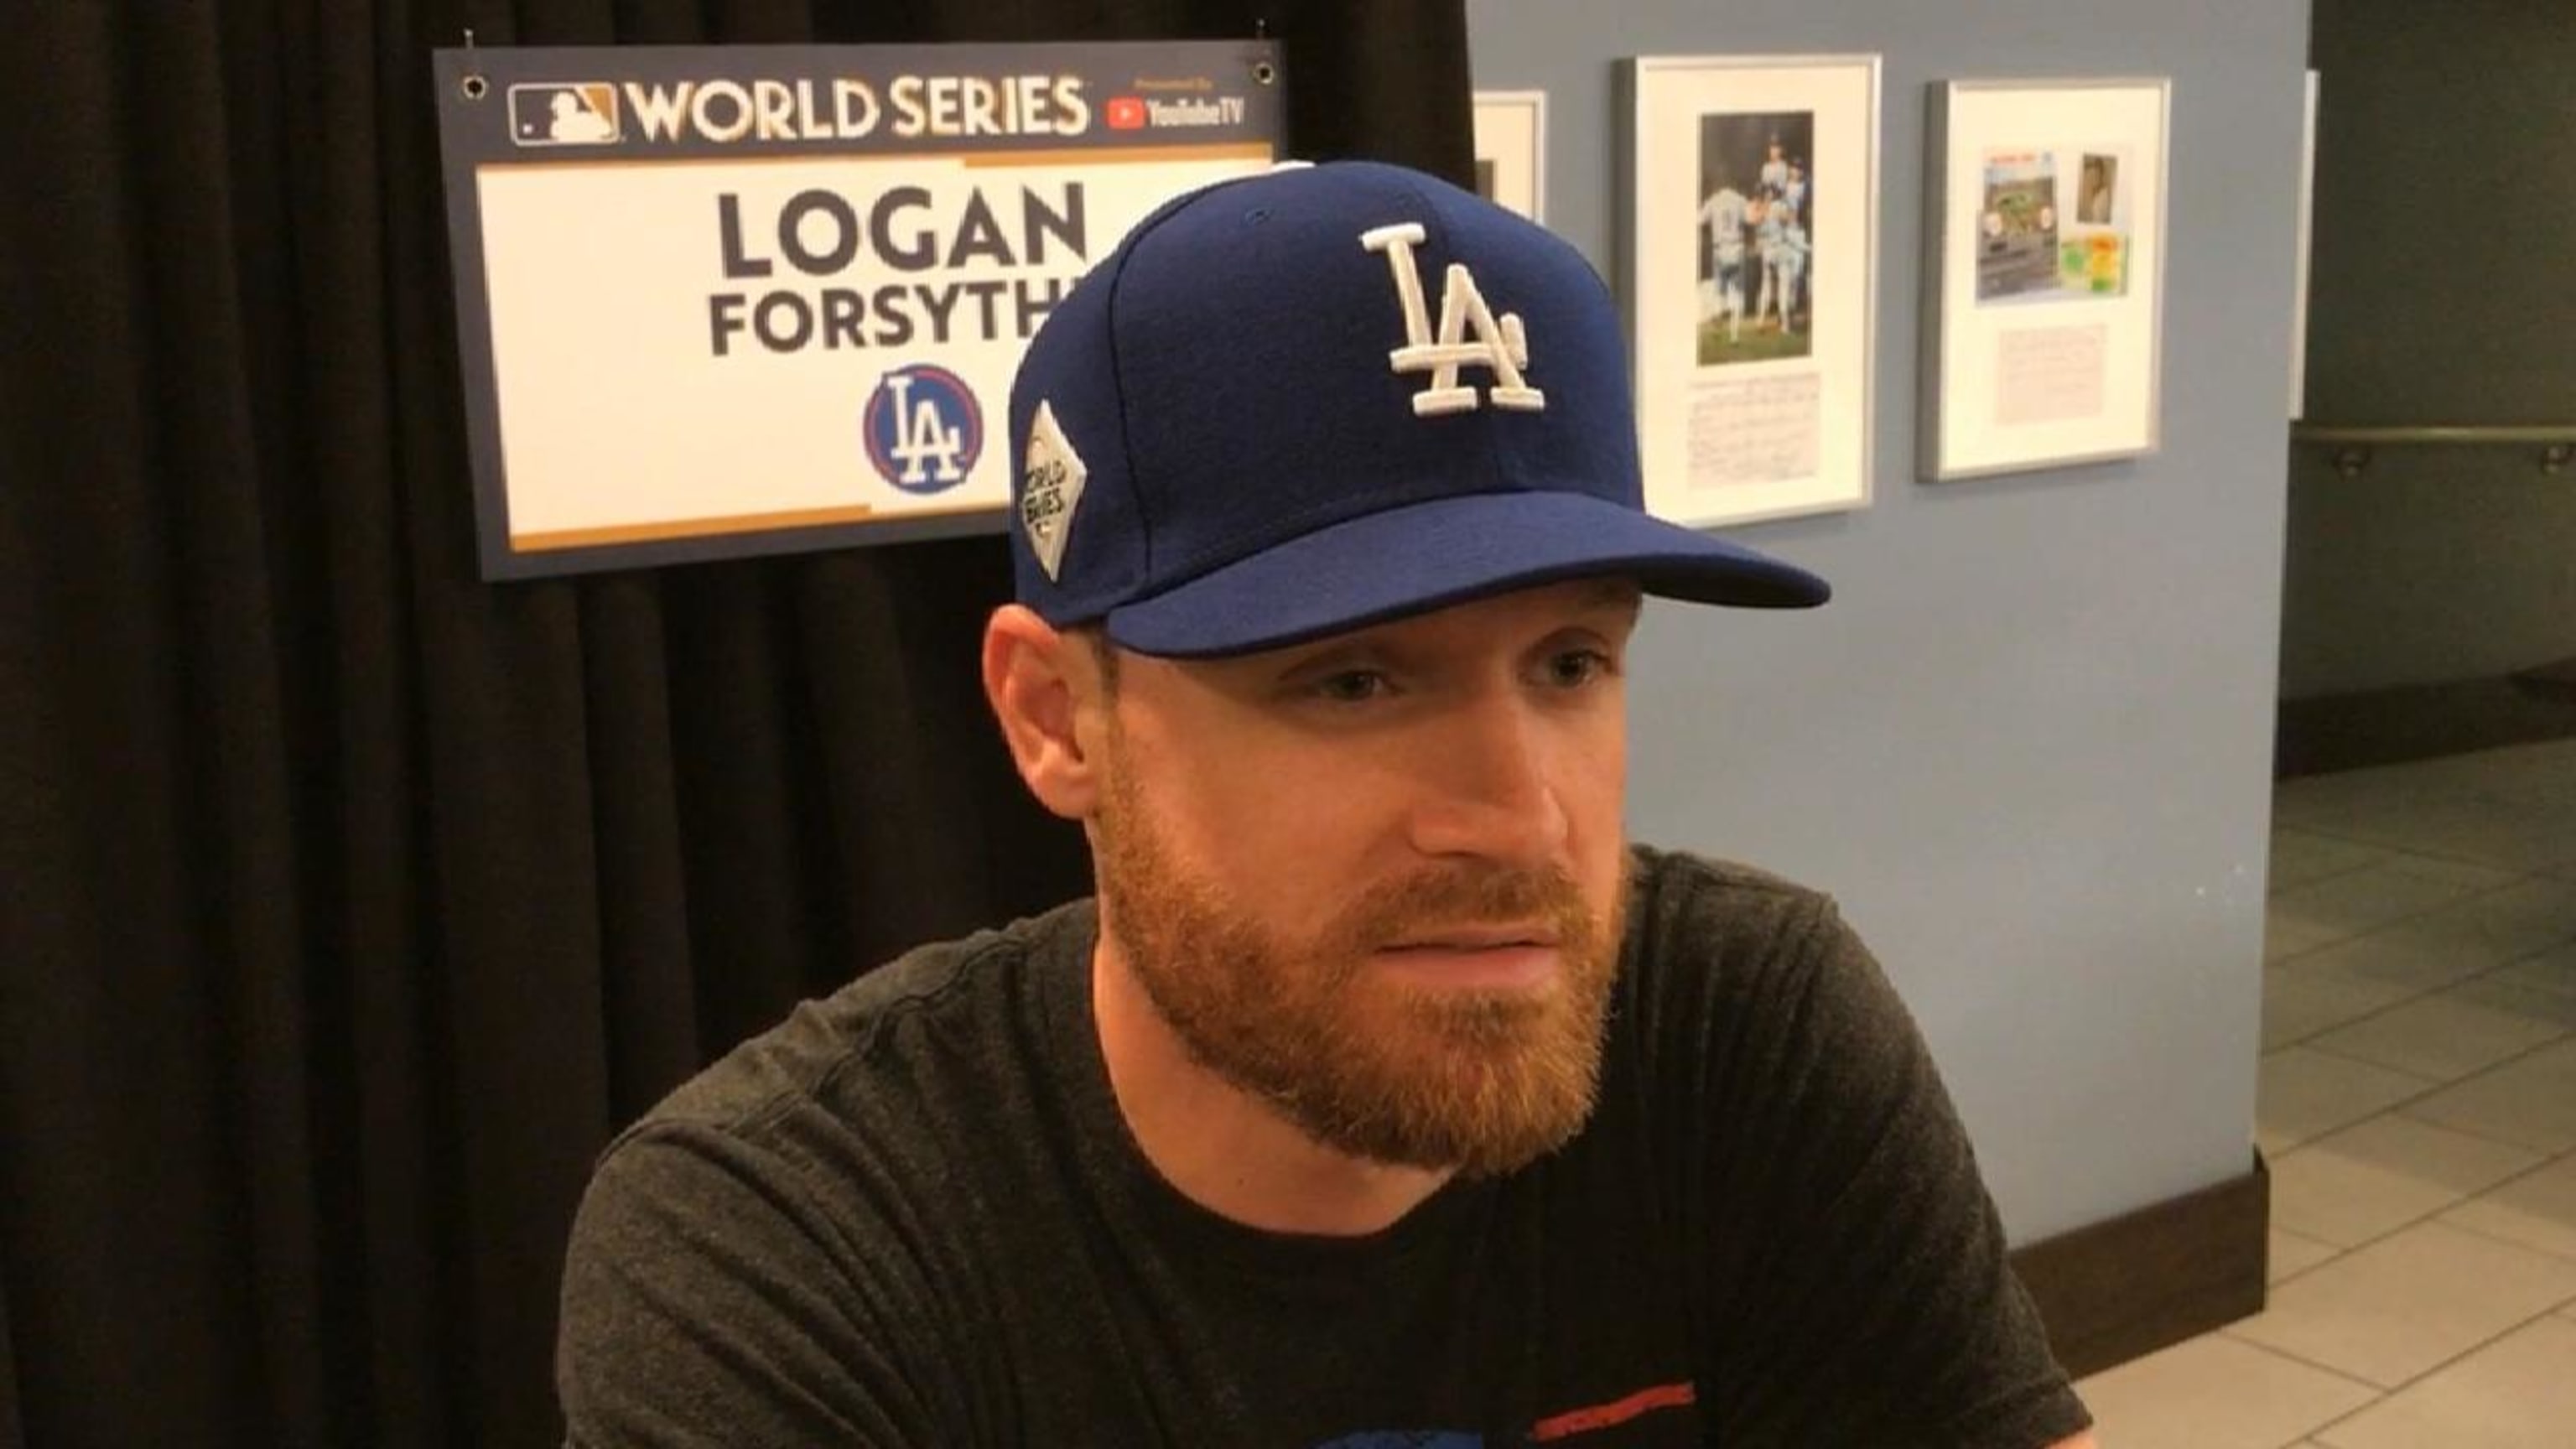 Meet the Players: Get to know the Dodgers